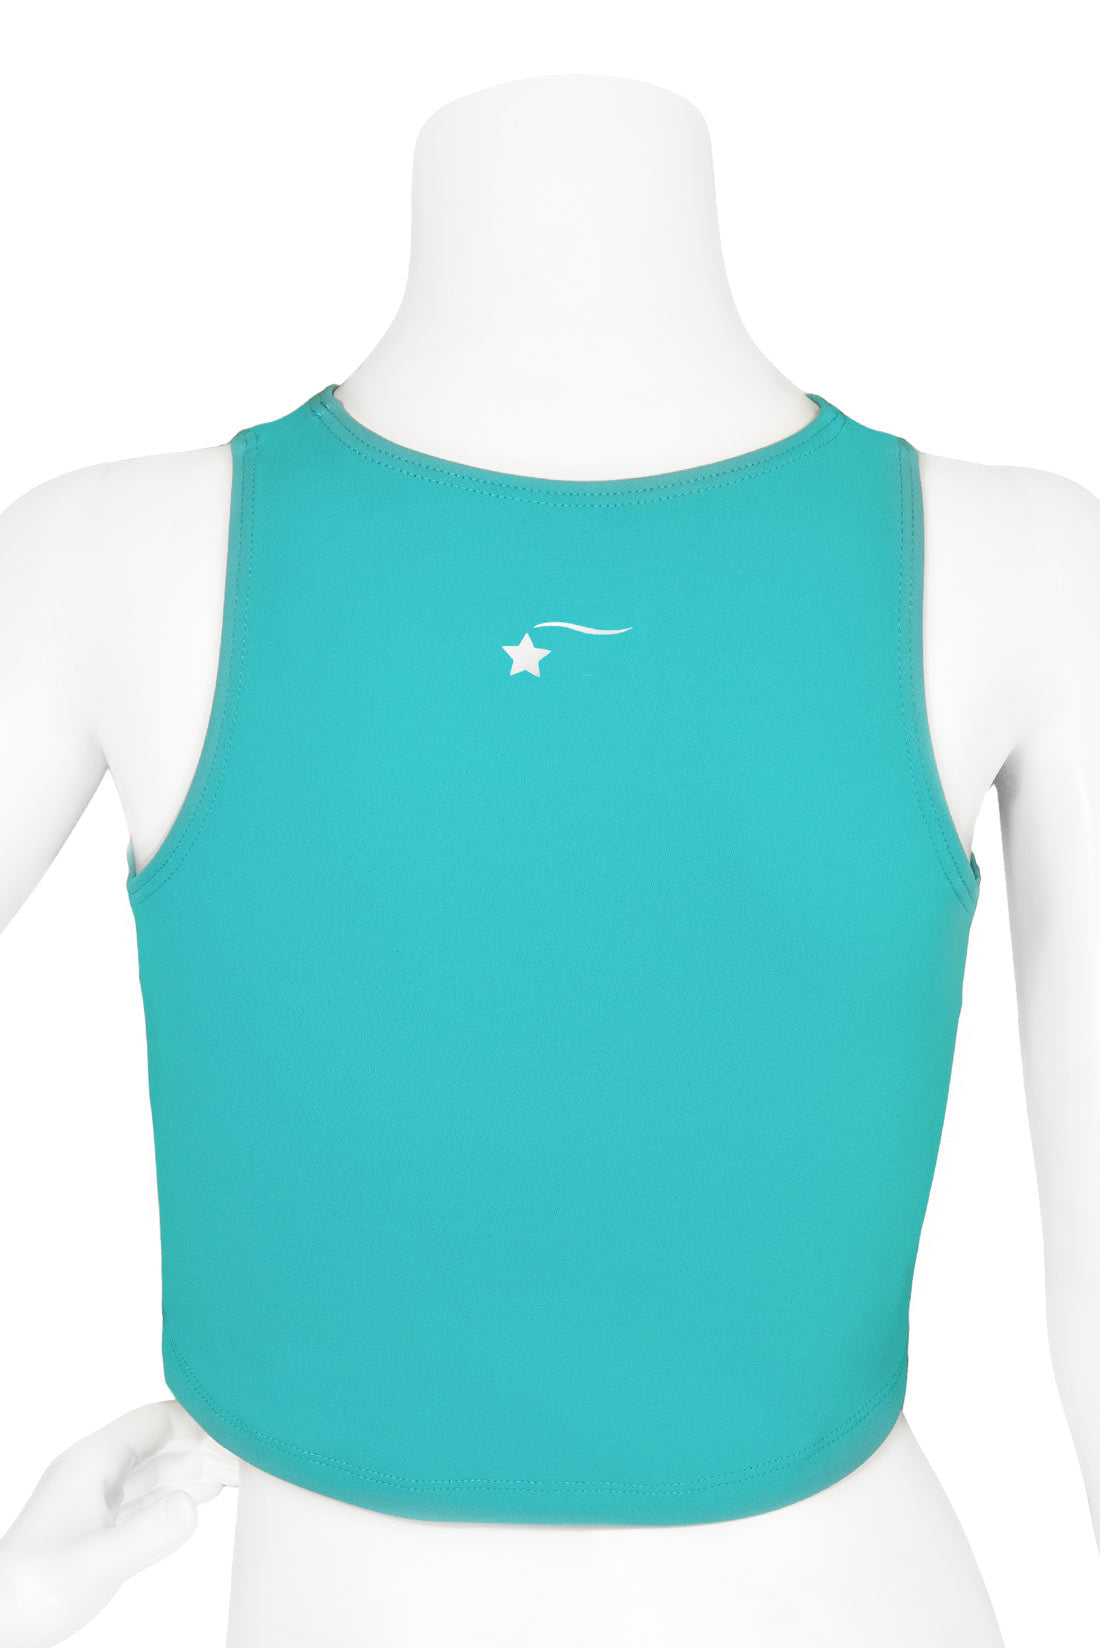 Sleevless green tank top for athletes by Destira, 2024